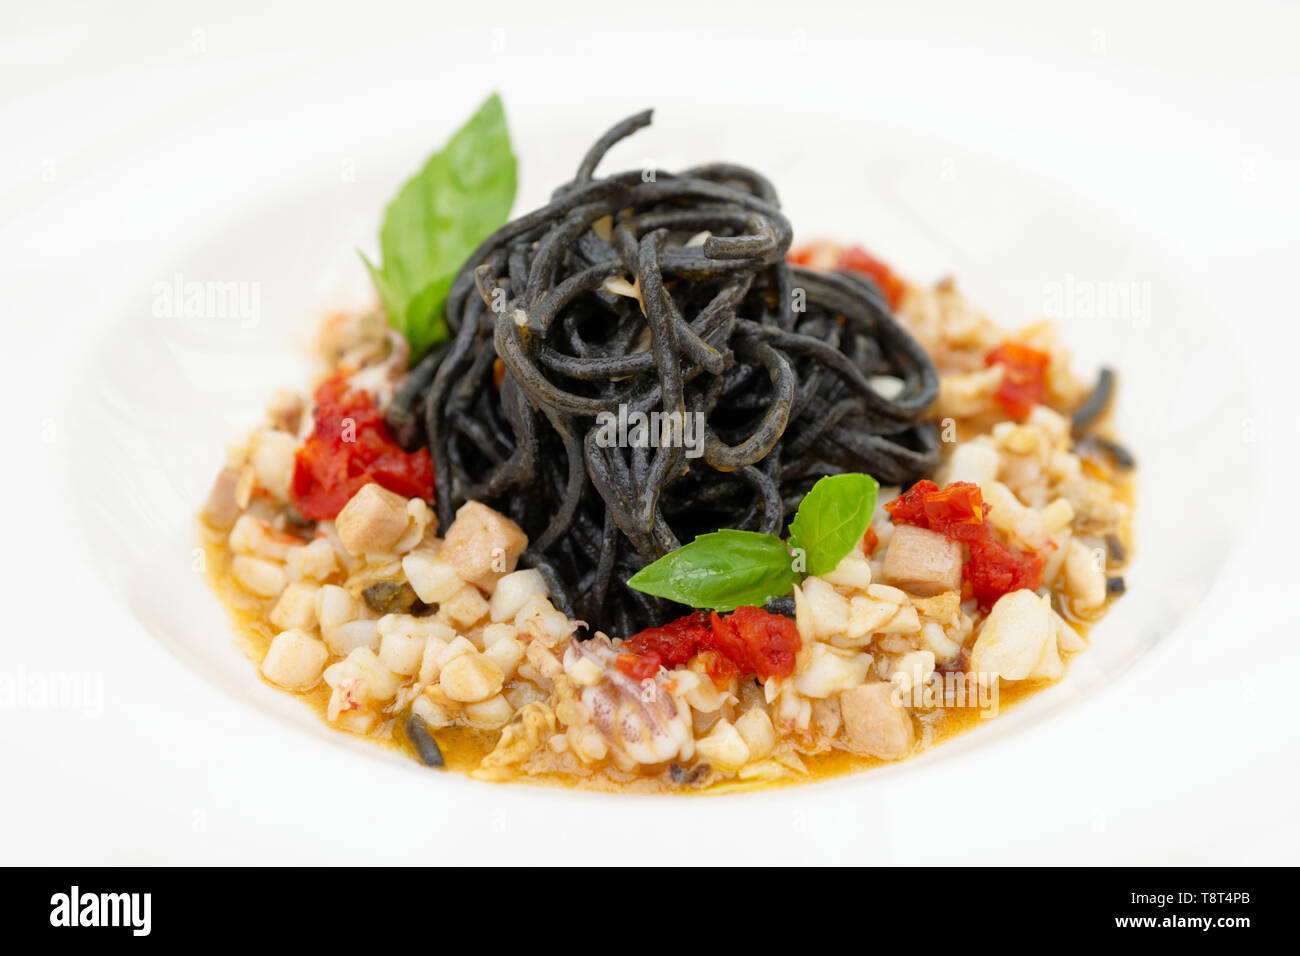 Black squid ink pasta with seafood, close-up Stock Photo